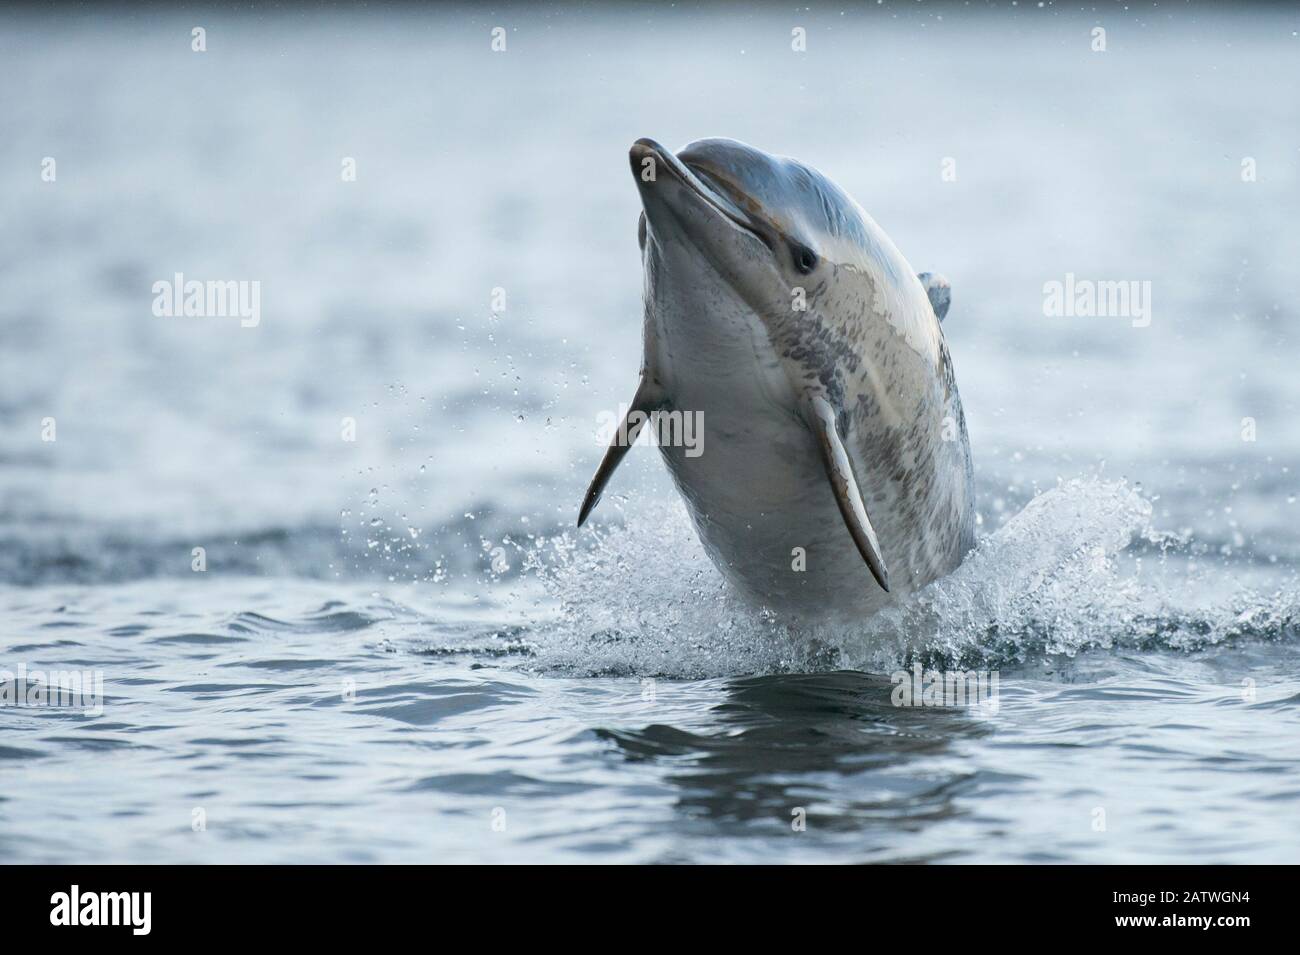 Common dolphin (Delphinus delphis) jumping out the water, Shetland, Scotland, UK, January. Stock Photo